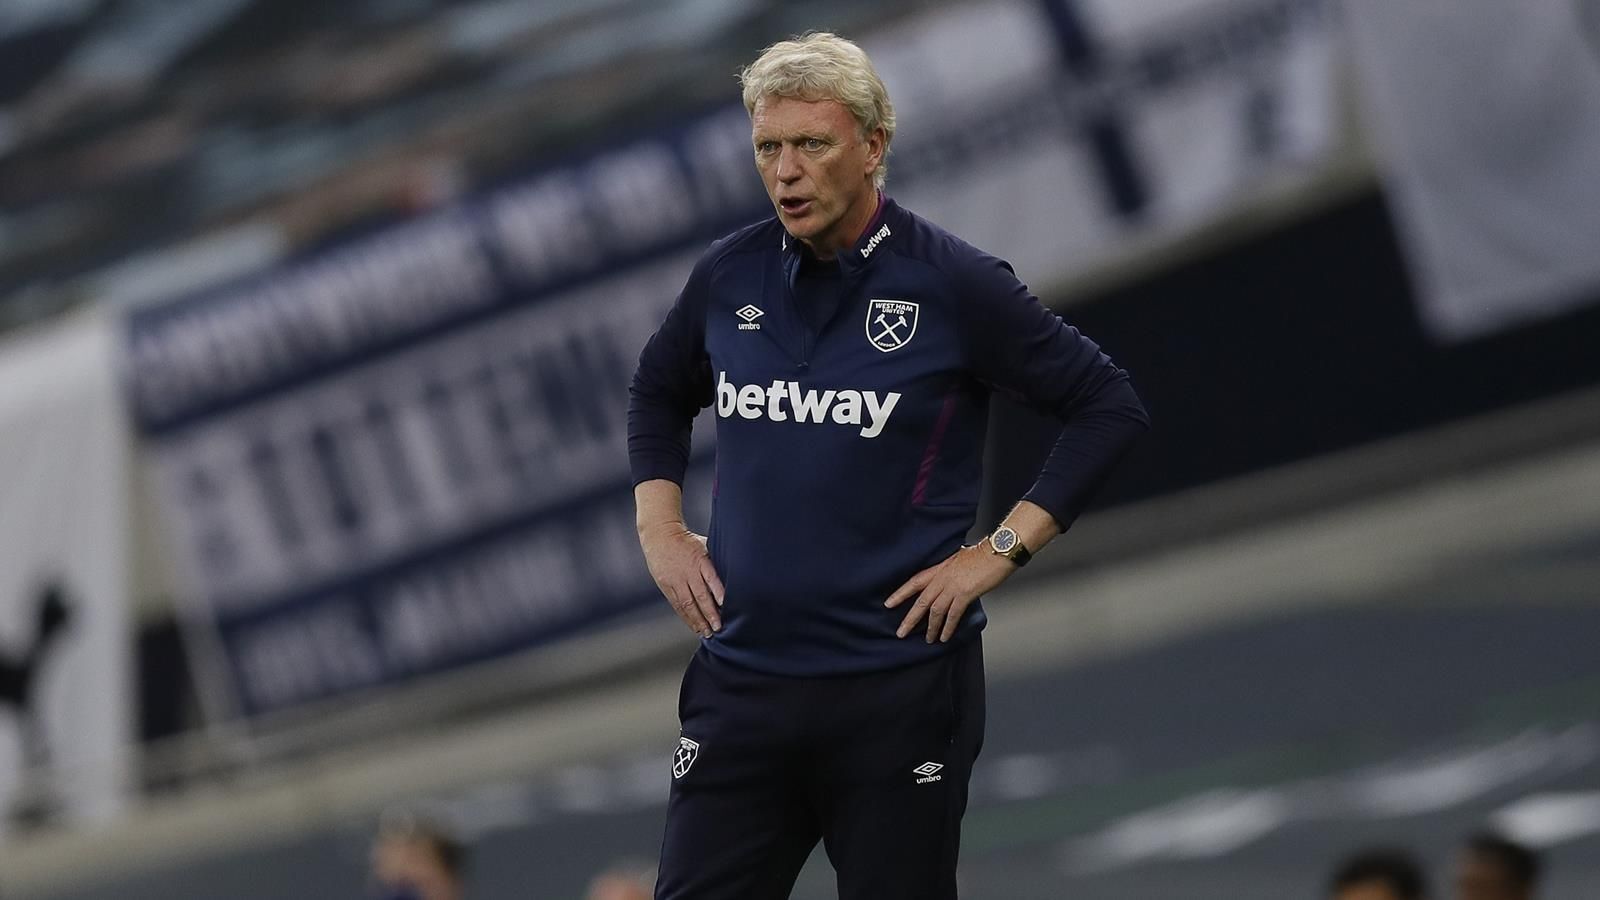 Moyes Says Winning over Chelsea Was Only the Beginning for West Ham